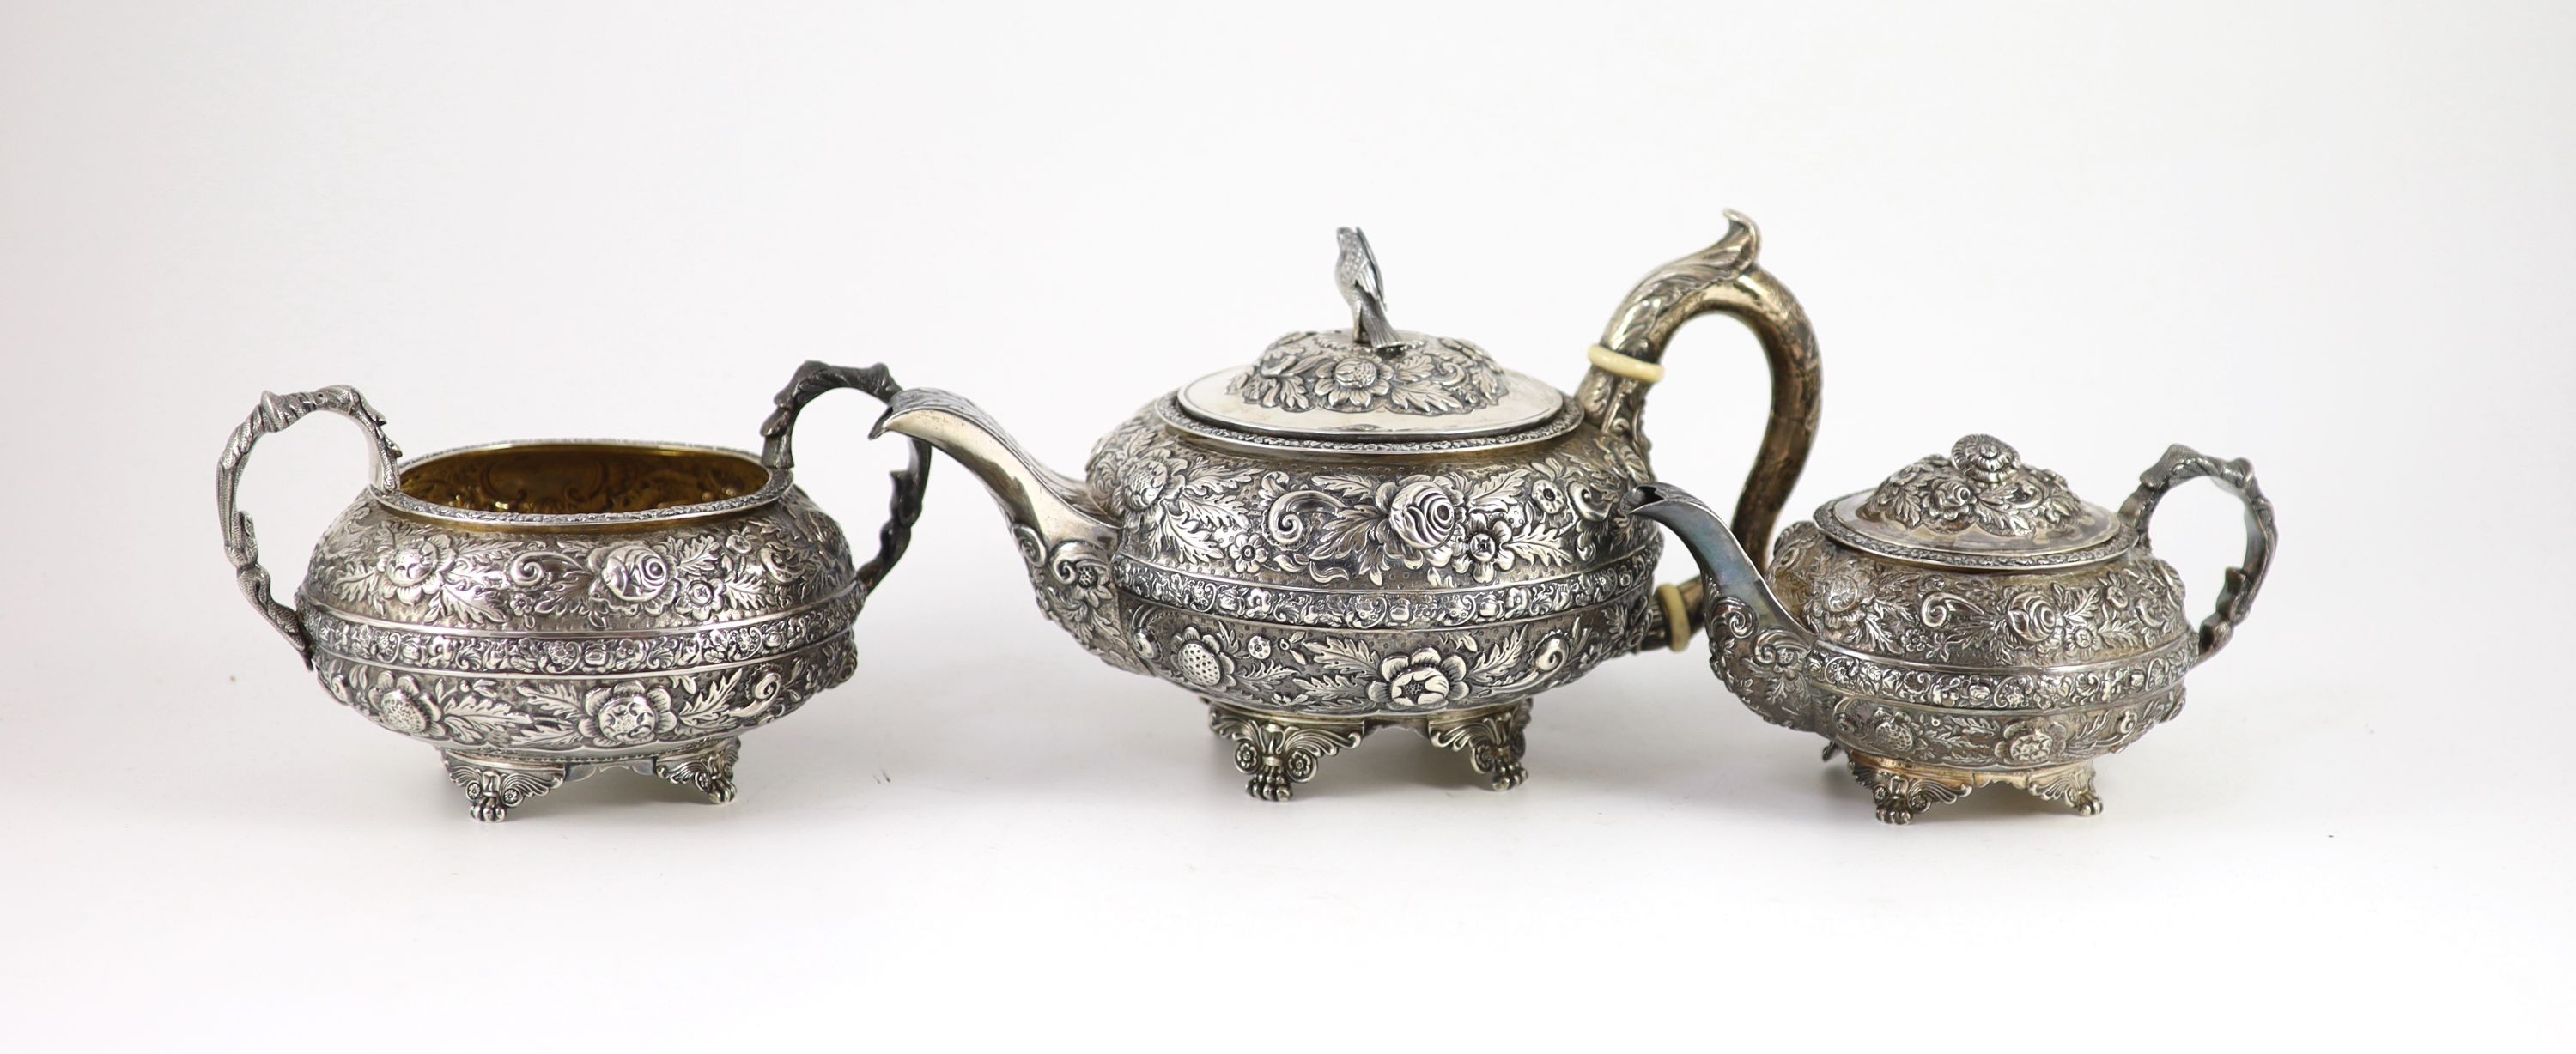 A late George III provincial silver three piece tea set by James Barber & William Whitwell